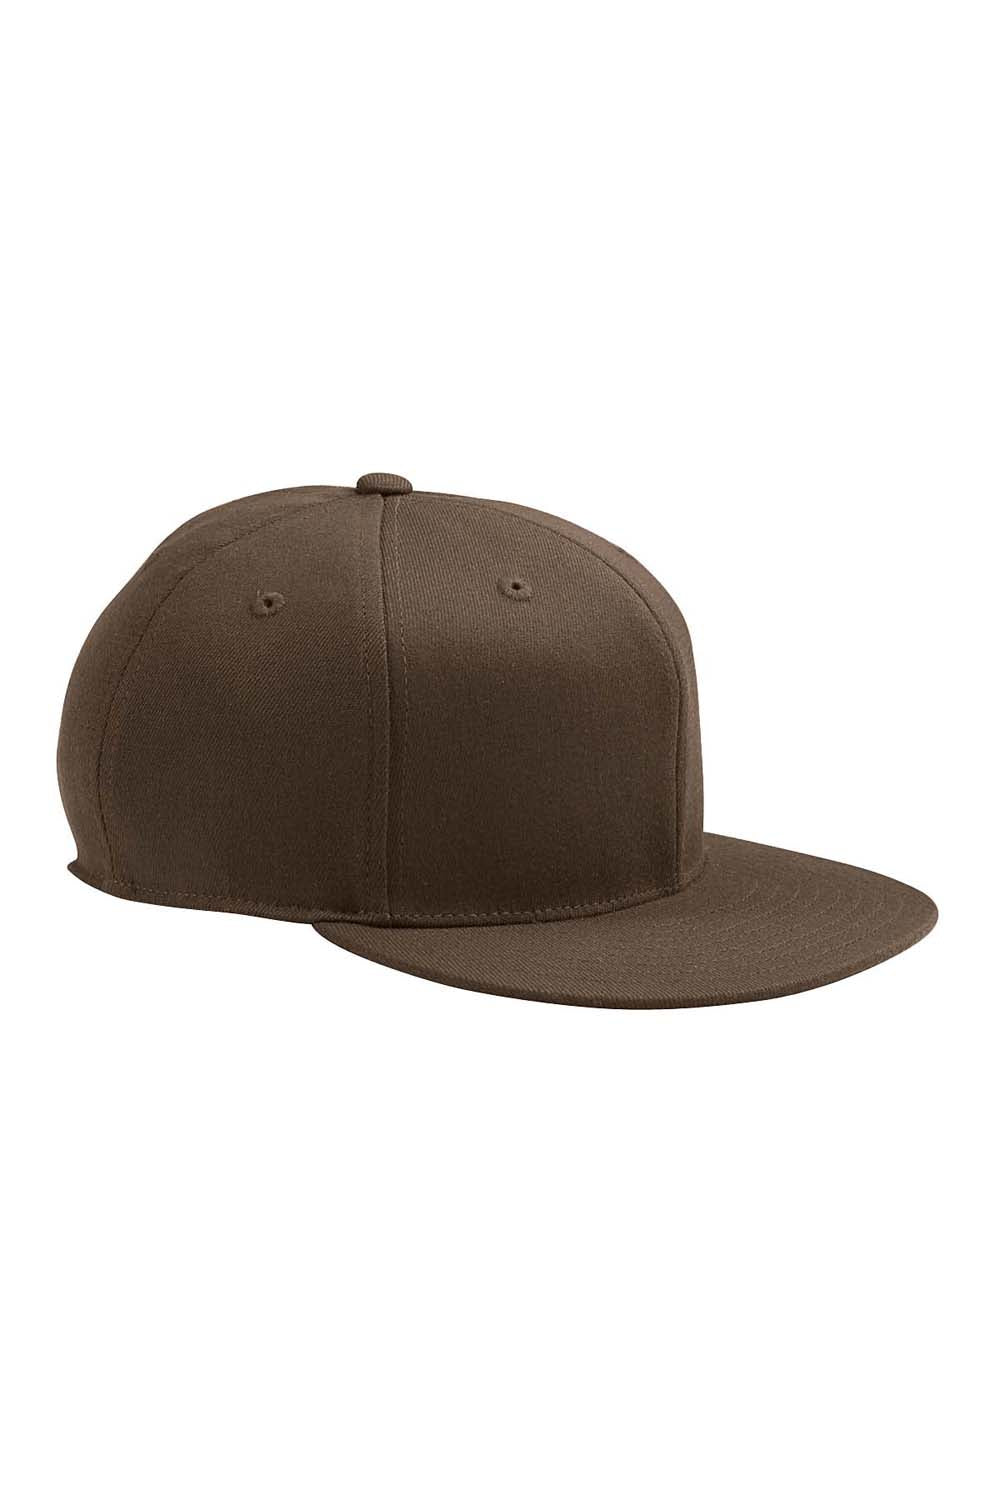 Flexfit 6210 Mens Fitted Stretch Fit Hat Brown Front